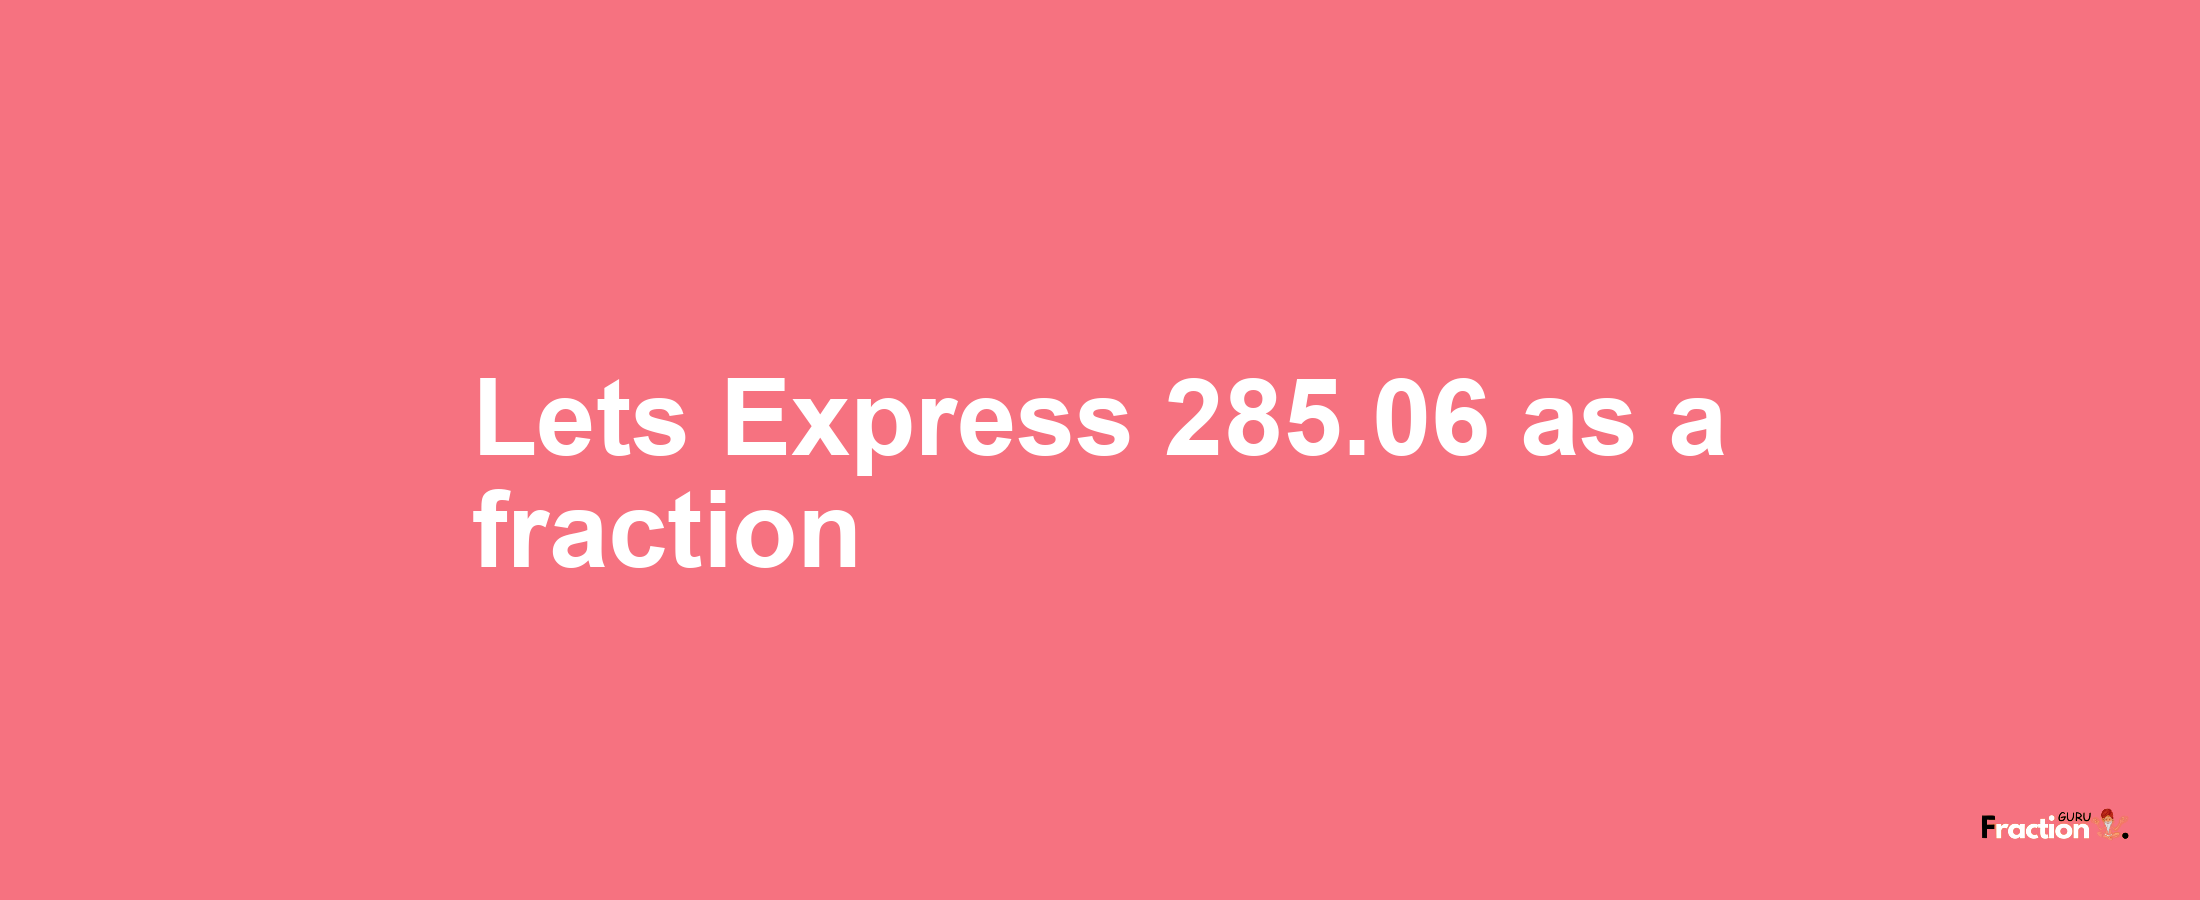 Lets Express 285.06 as afraction